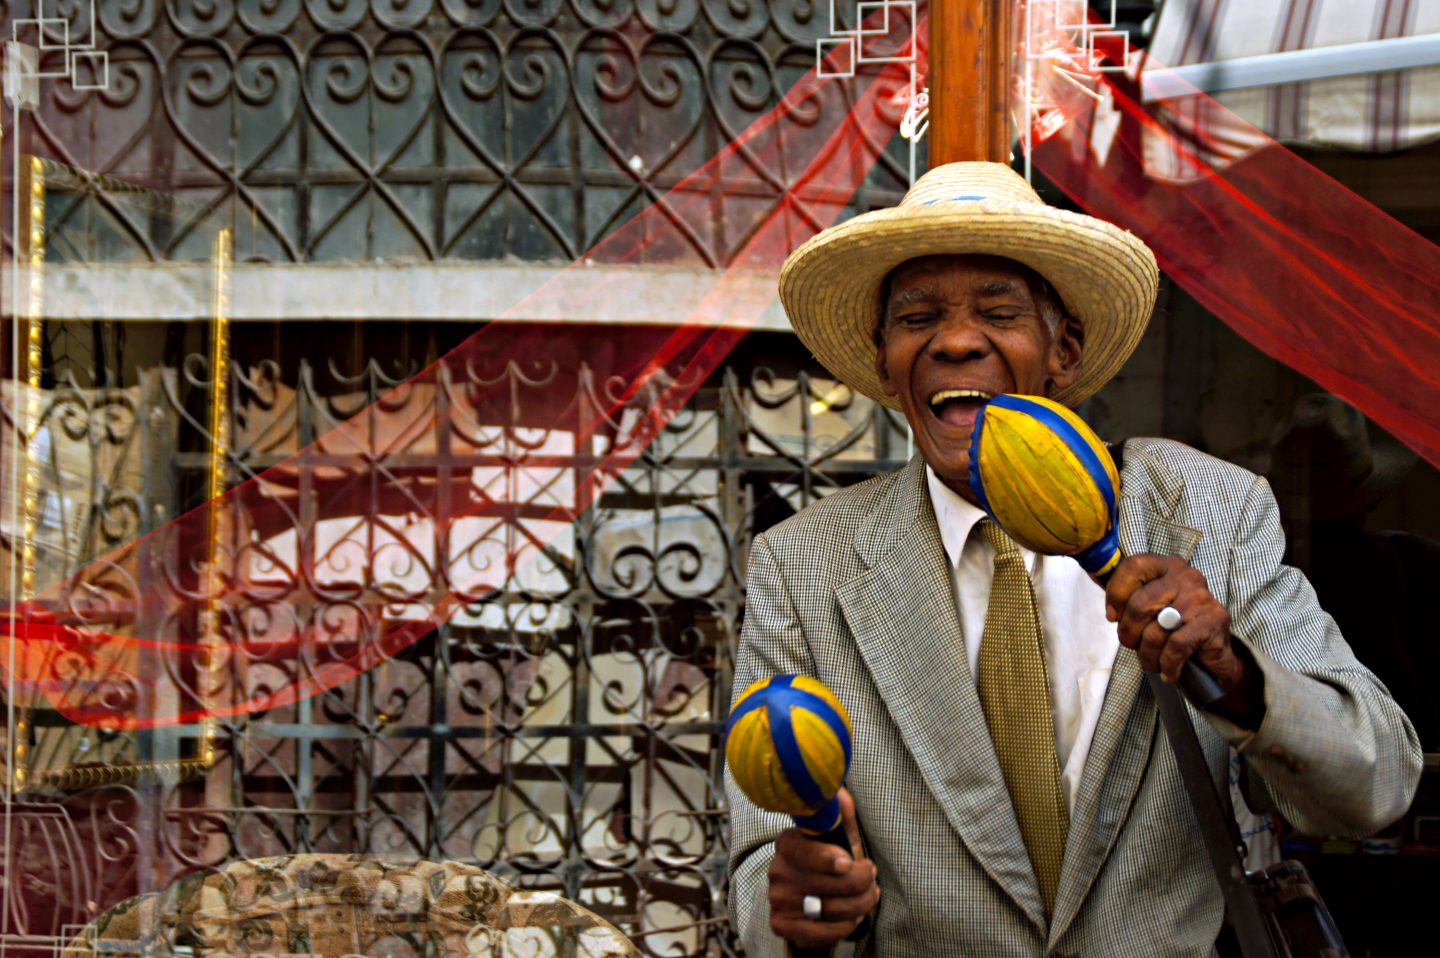 To experience Cuba means discovering its rhythms in every corner